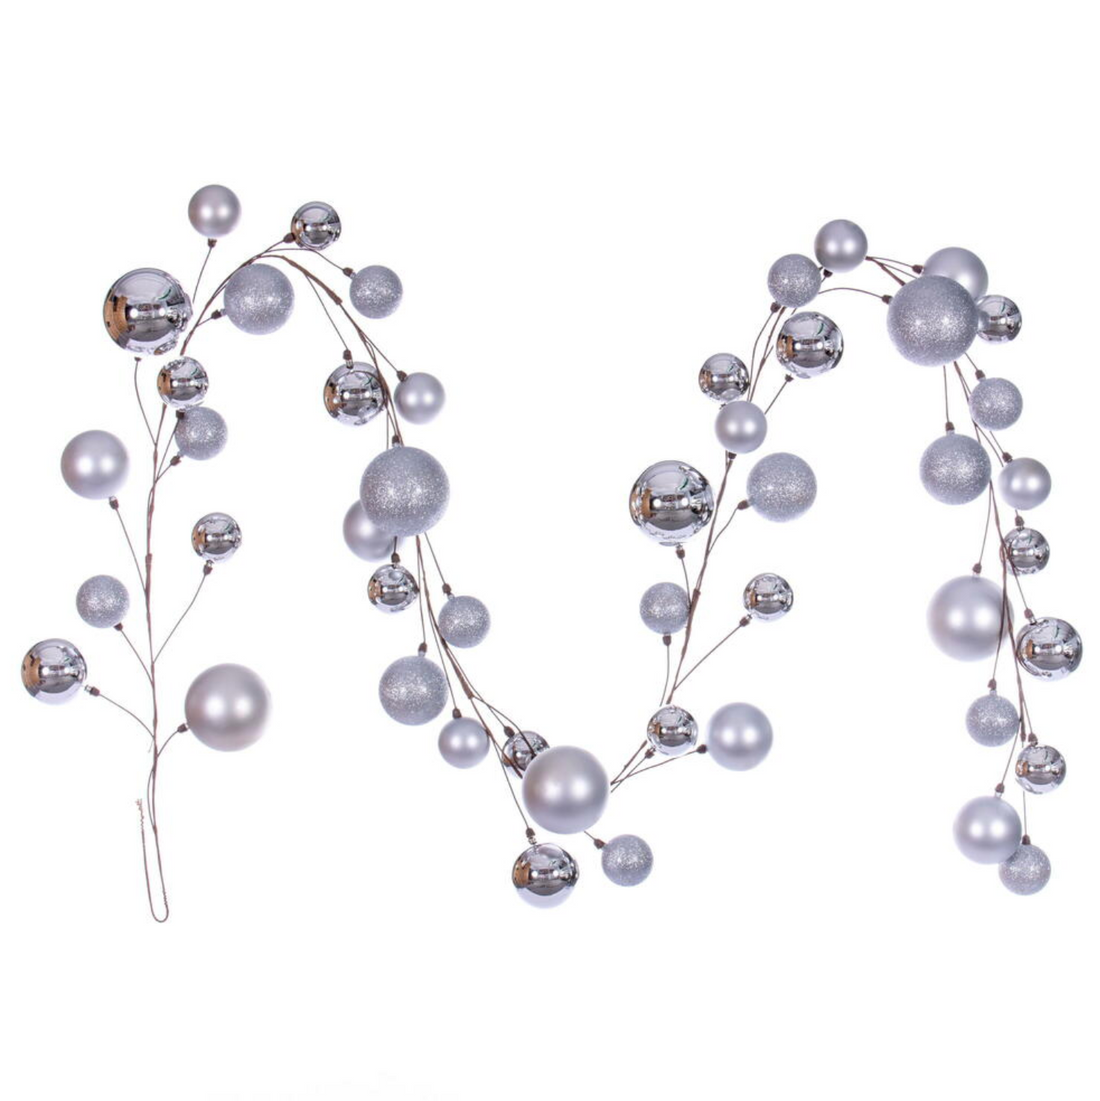 Silver Matte and Shiny Ball Ornament Garland